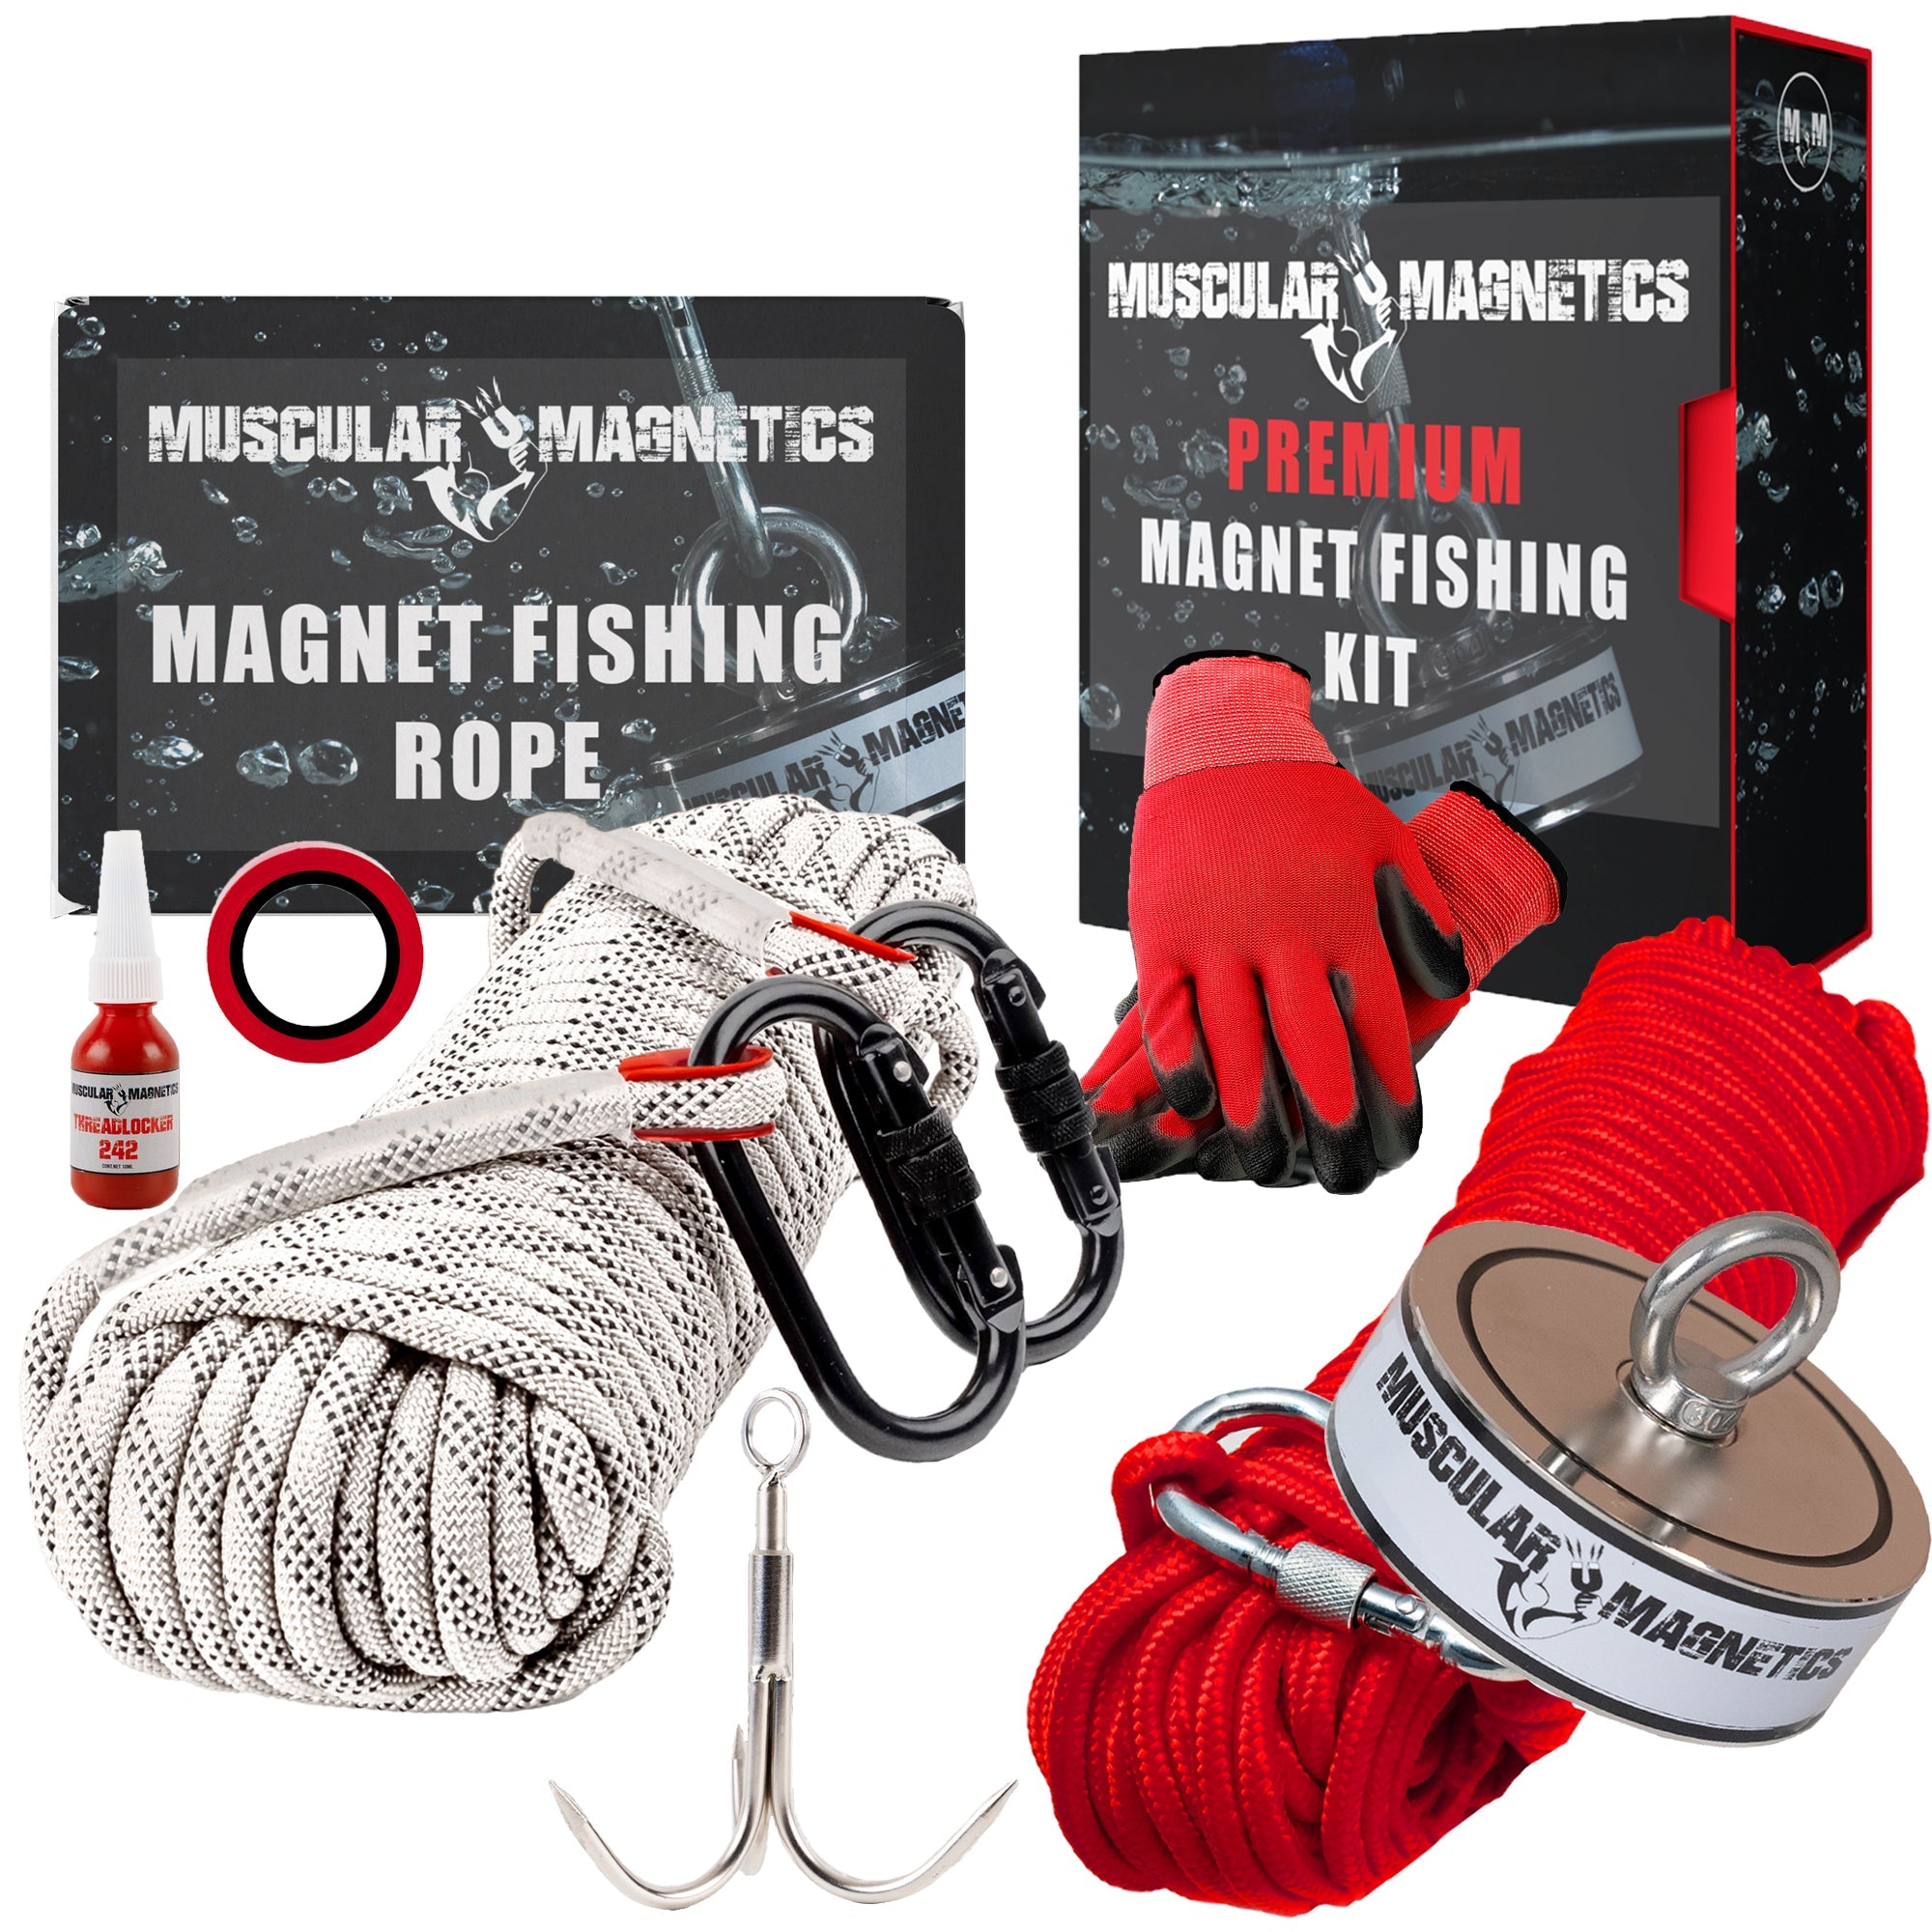 2625LB DOUBLE-SIDED MAGNET FISHING KIT & DURABLE MAGNET FISHING ROPE